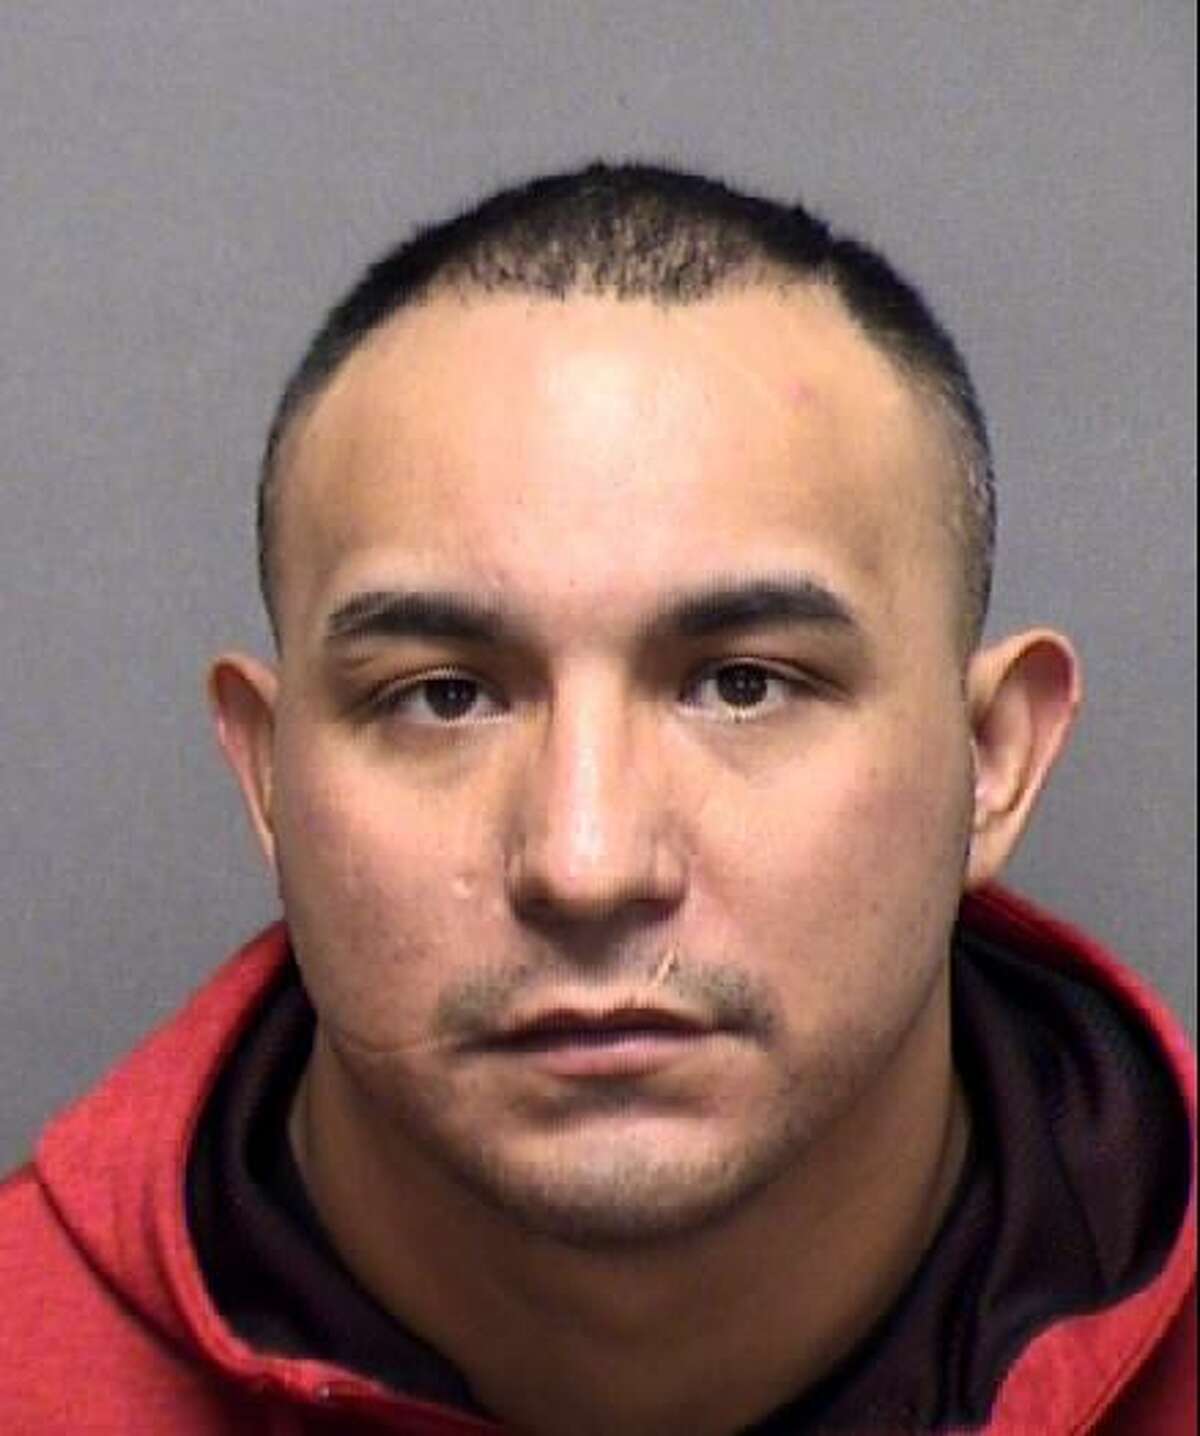 Reyes Gallegos, 37, had his bail reduced on Jan. 14, roughly two months after being indicted for murder in his wife’s death.